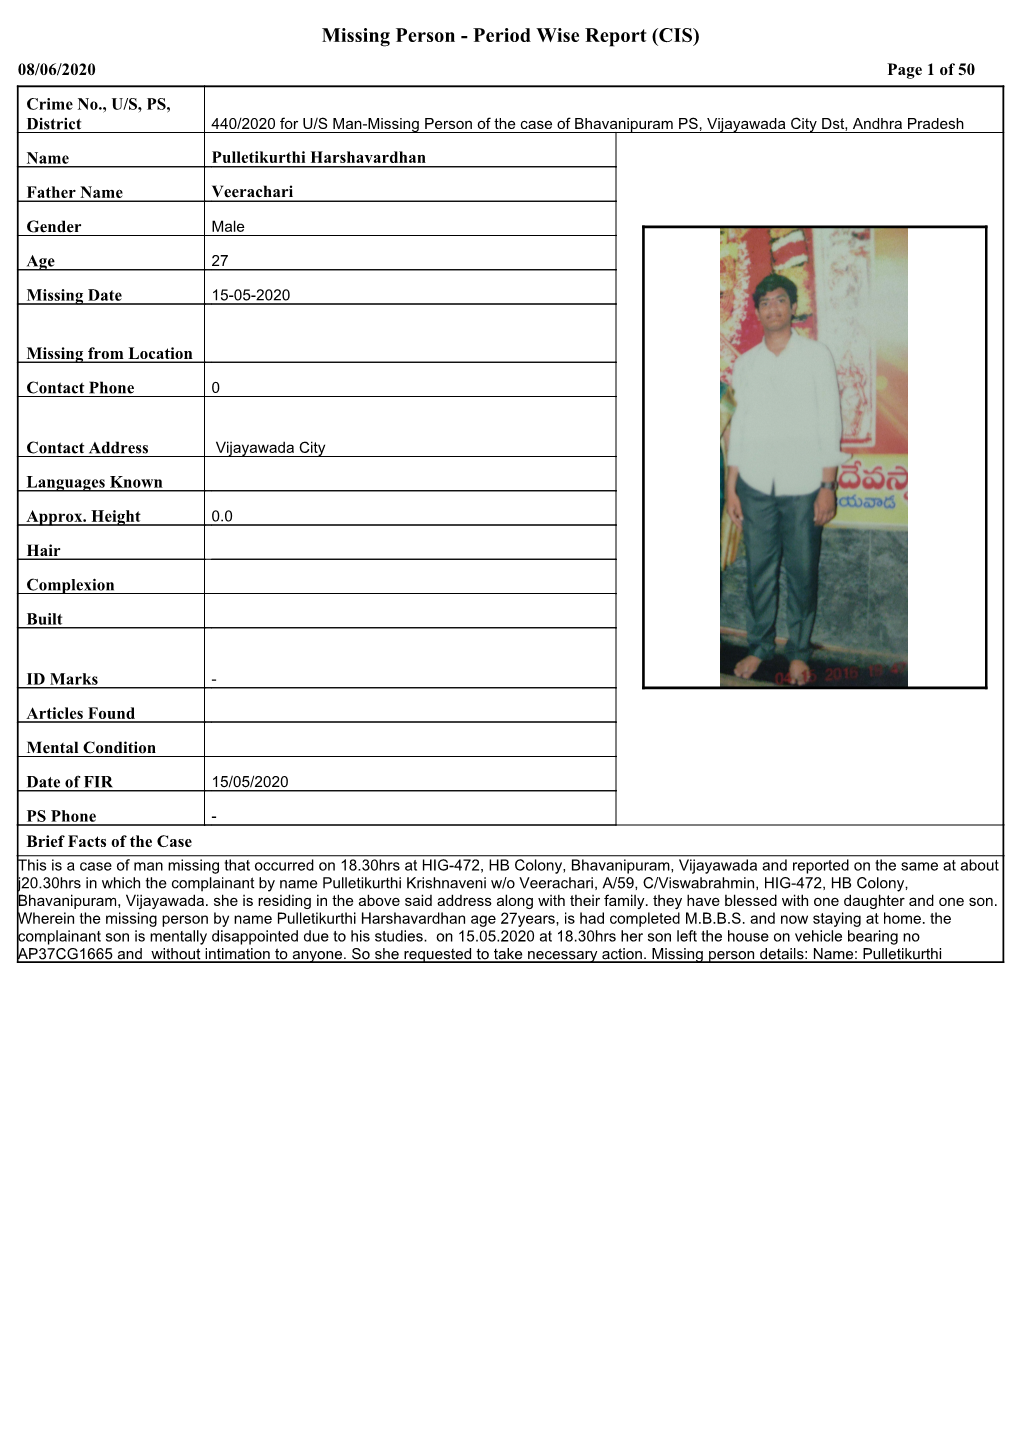 Missing Person - Period Wise Report (CIS) 08/06/2020 Page 1 of 50